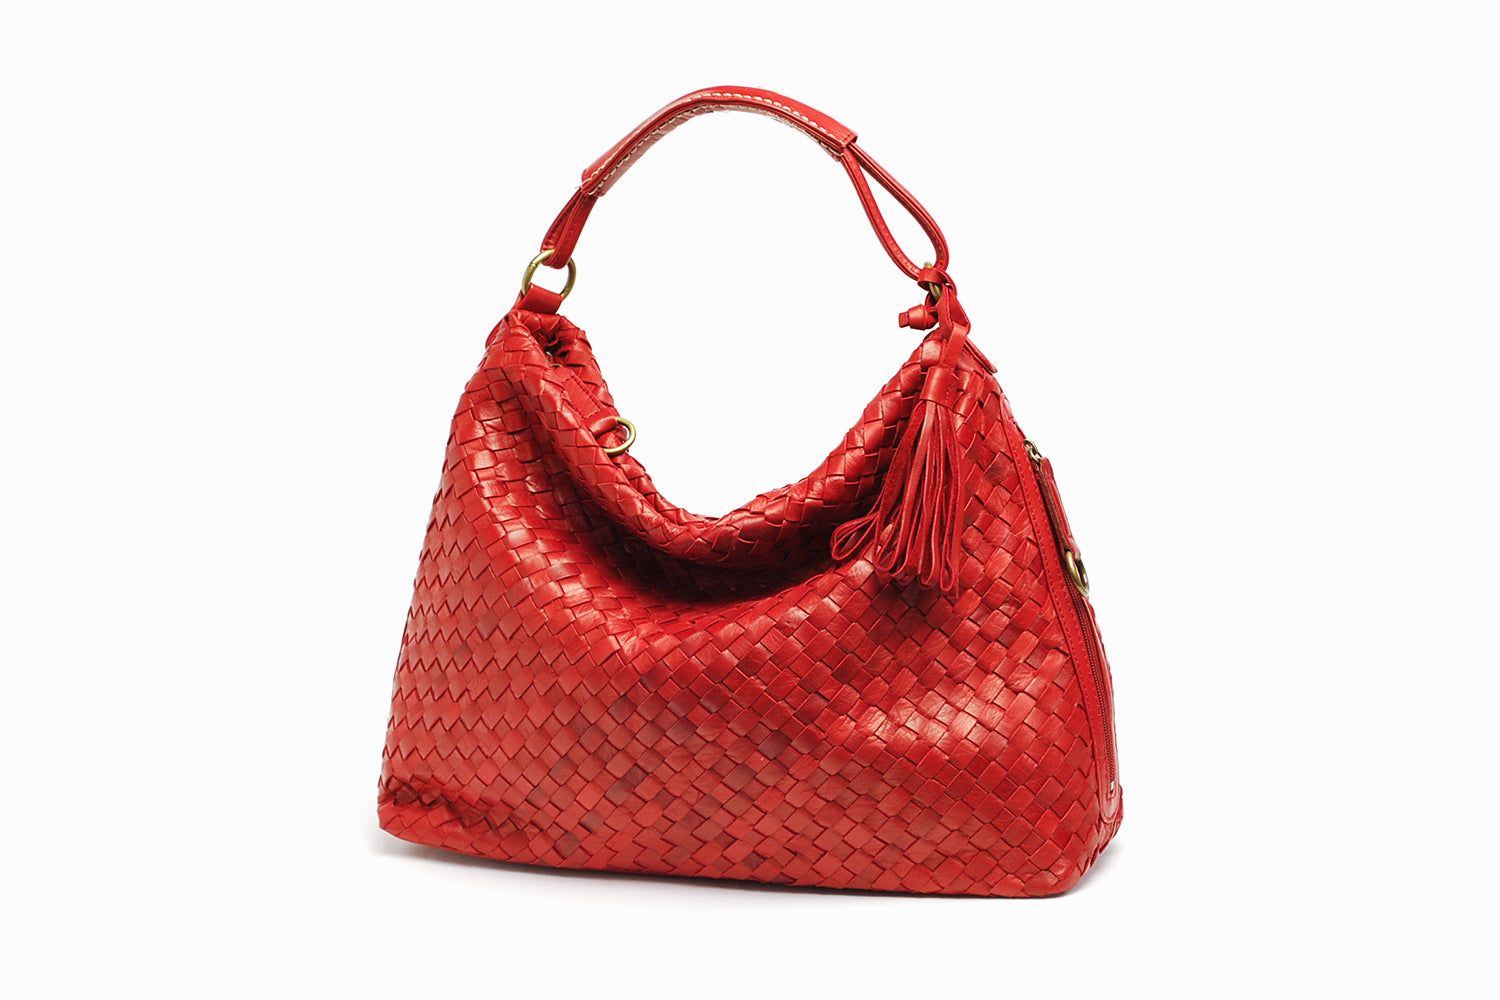 LILY / METS See it, touch it, use it and be impressed! Volume tote with soft pony mesh